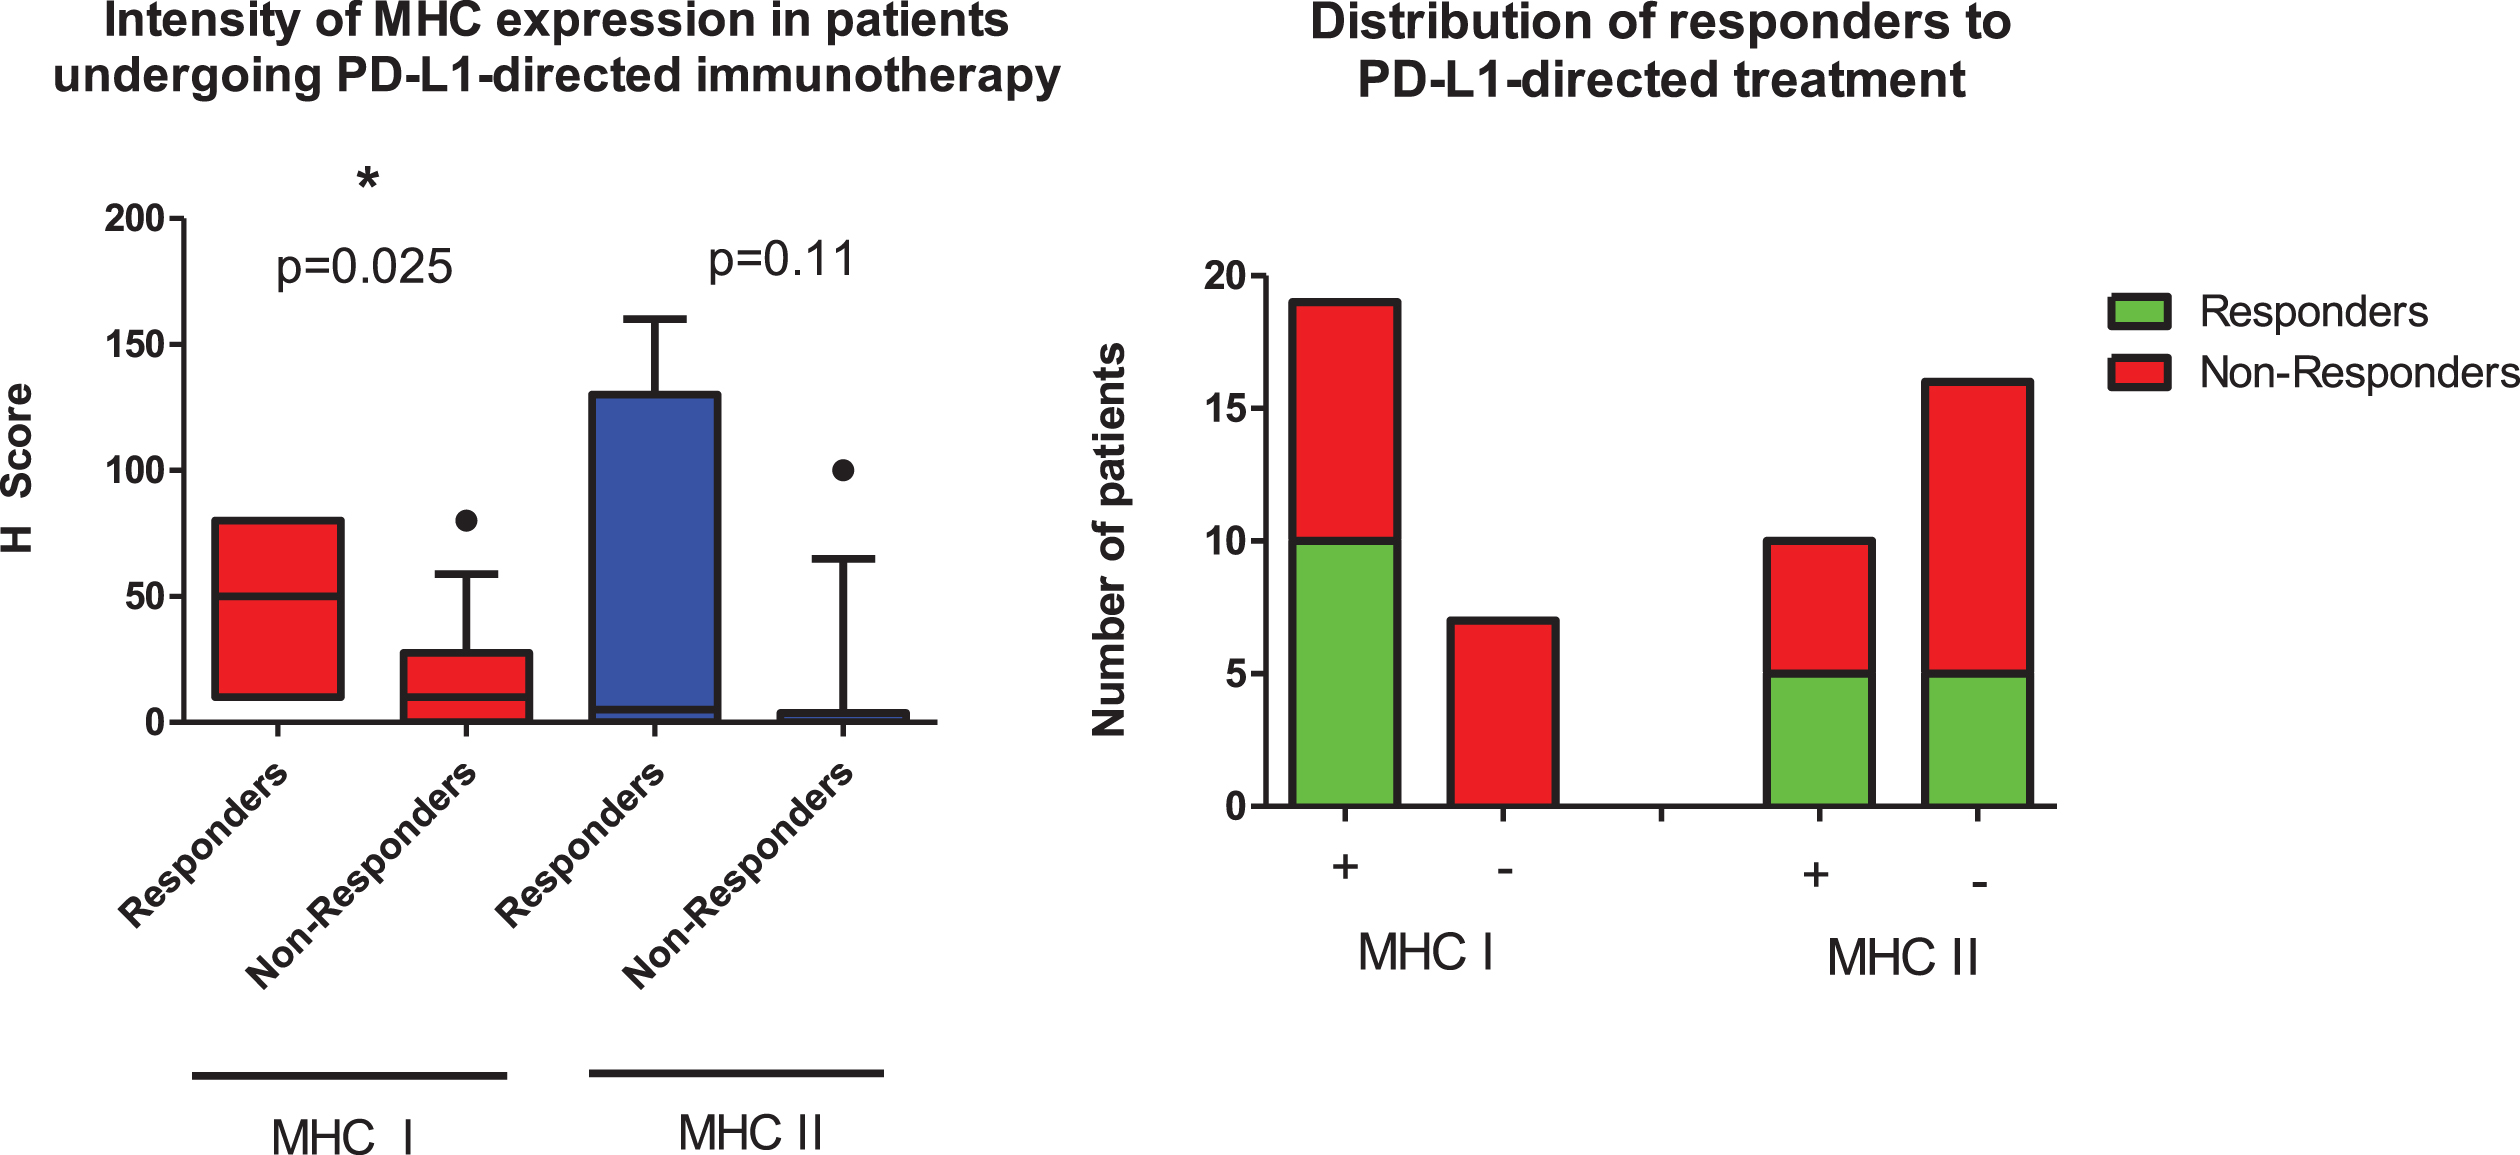 Responders to PD-1/PD-L1 directed immunotherapy display a higher expression of MHC I (left image, p = 0.025). Responders are exclusively found in the MHC I + group (right image, responders in green).